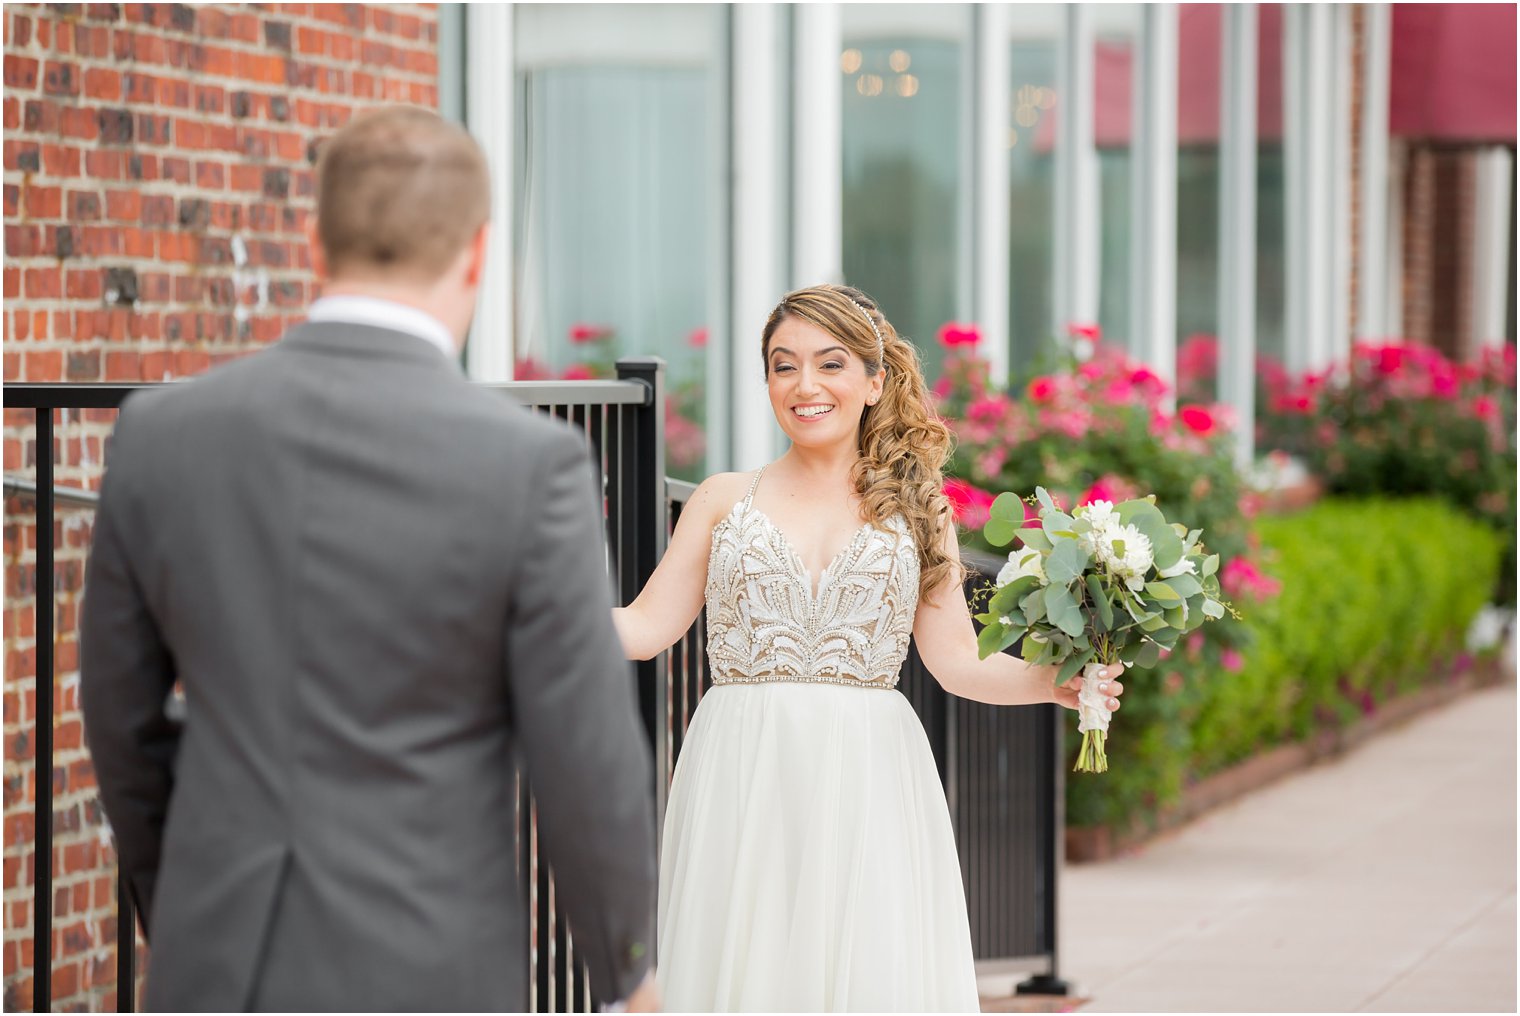 Bride's first look on her wedding day | Red Bank NJ Wedding